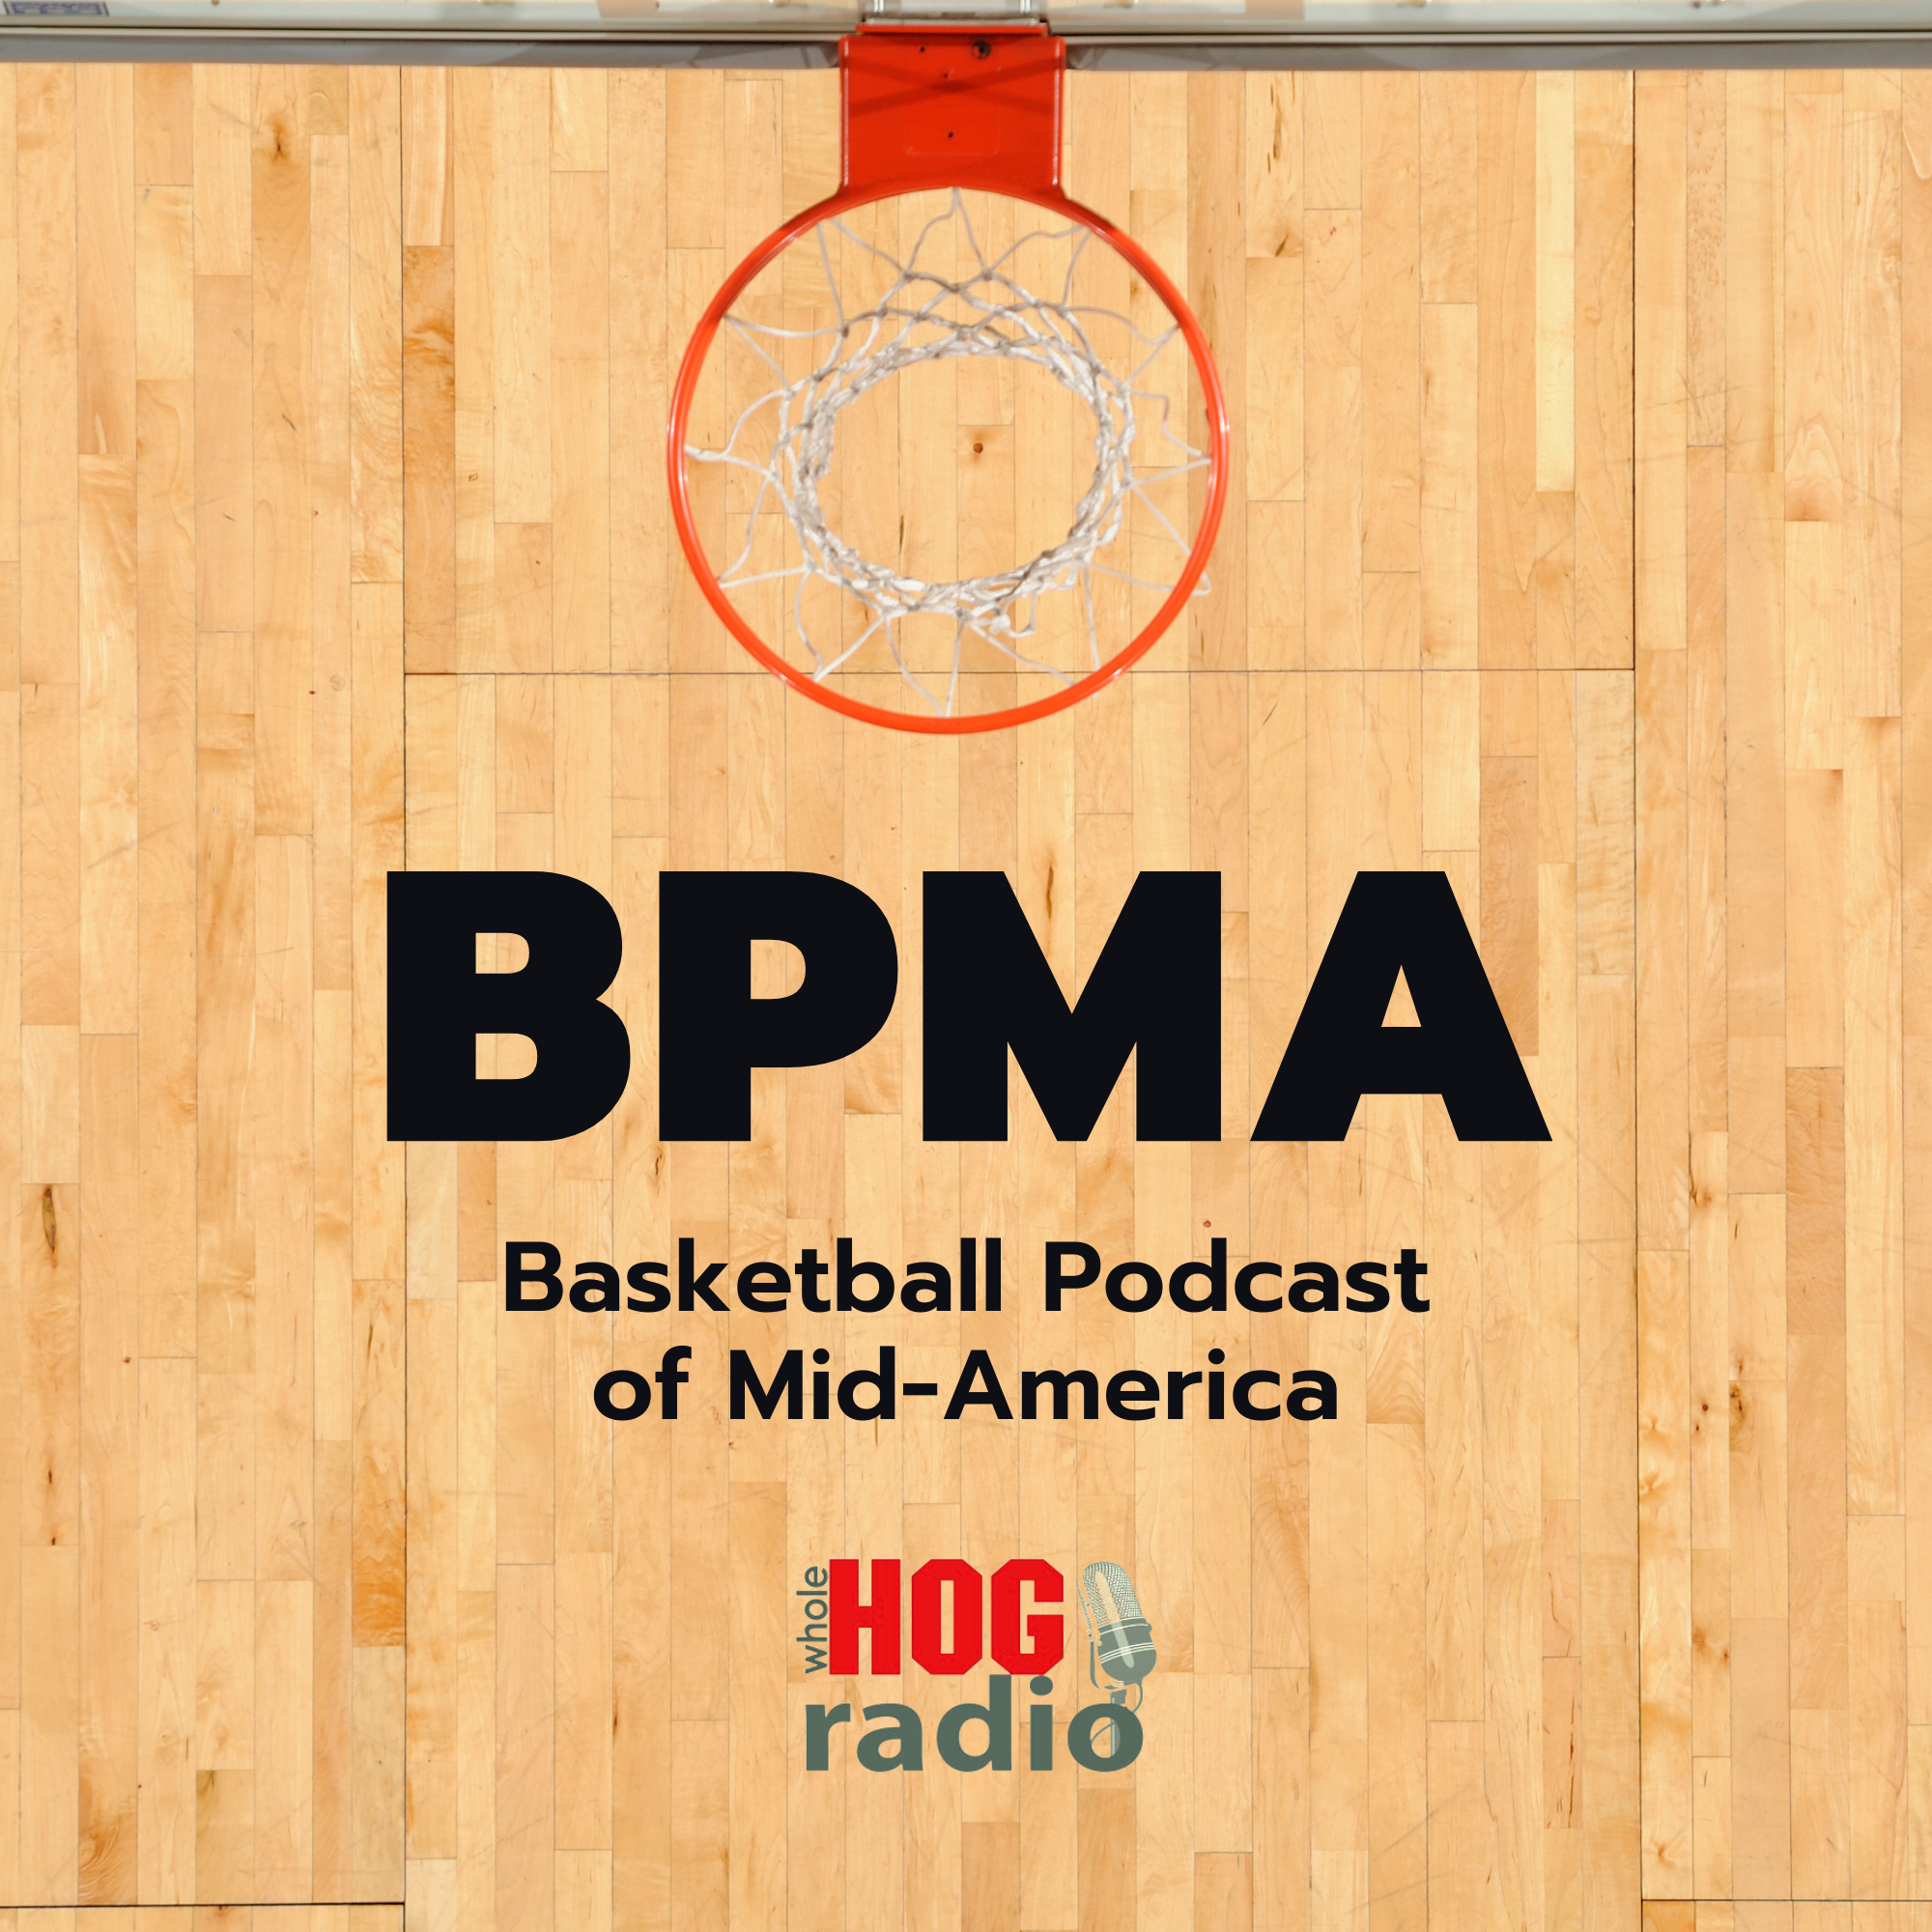 Basketball Podcast of Mid-America: It’s Not Looking Good